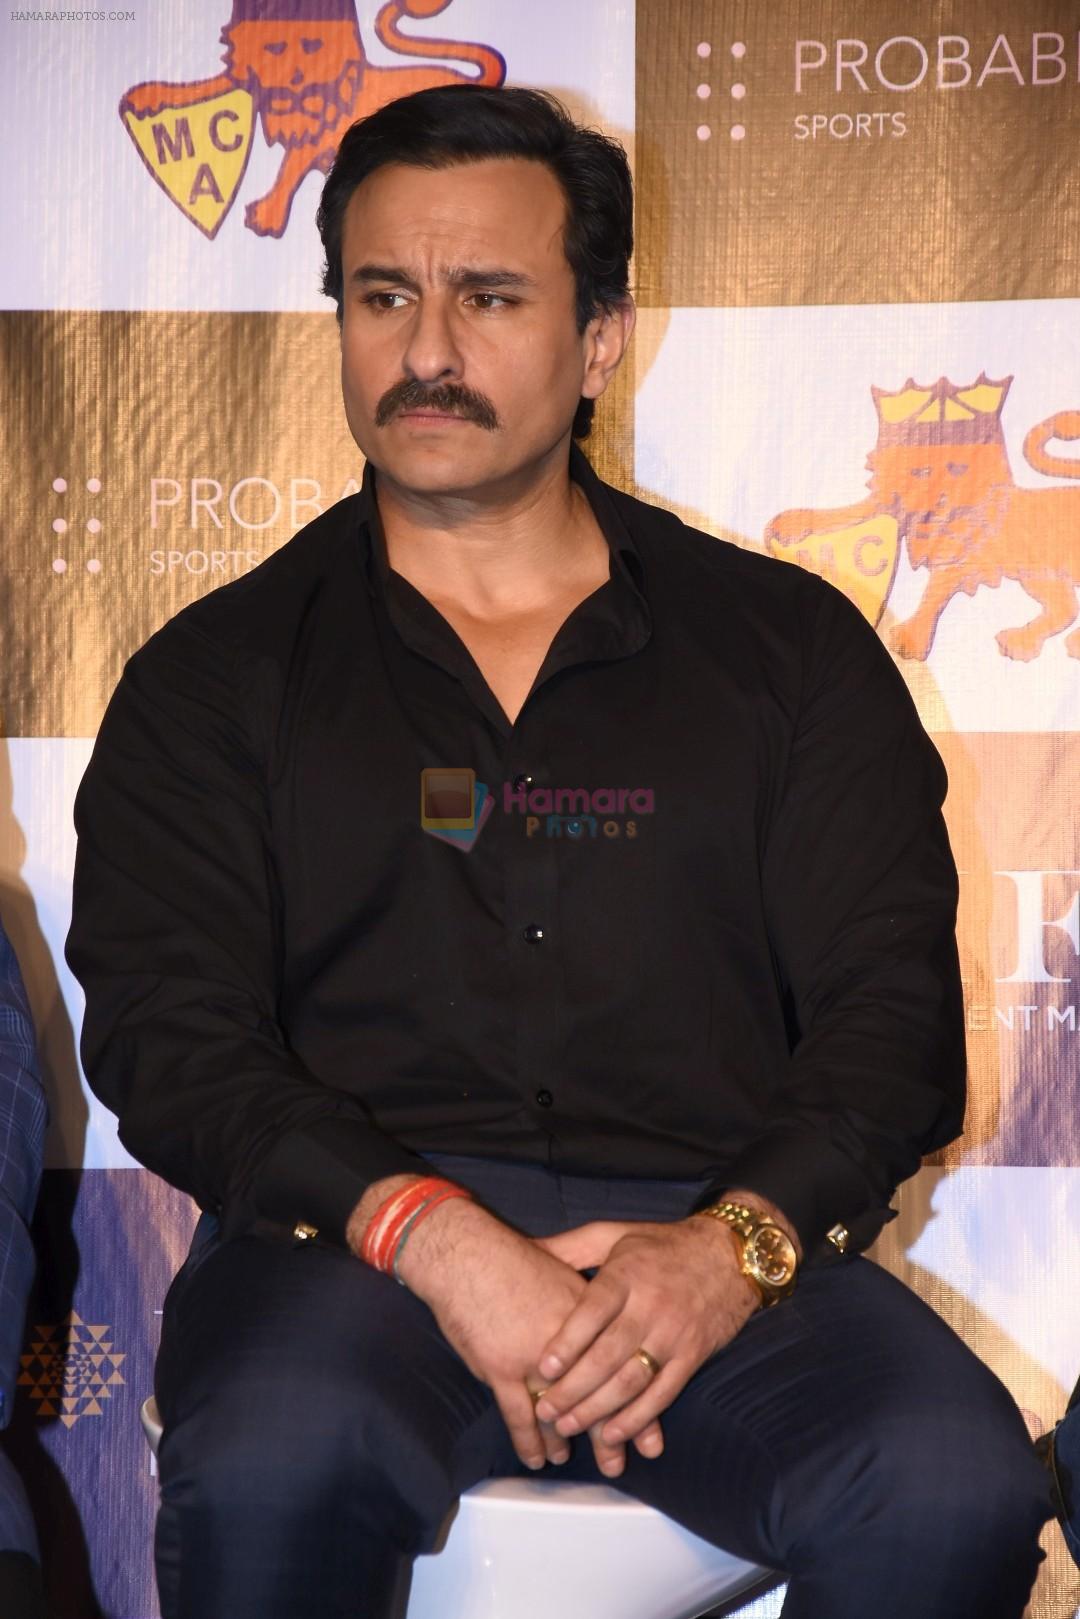 Saif Ali KHan at the launch of Press conference of T20 Mumbai League on 7th Dec 2017